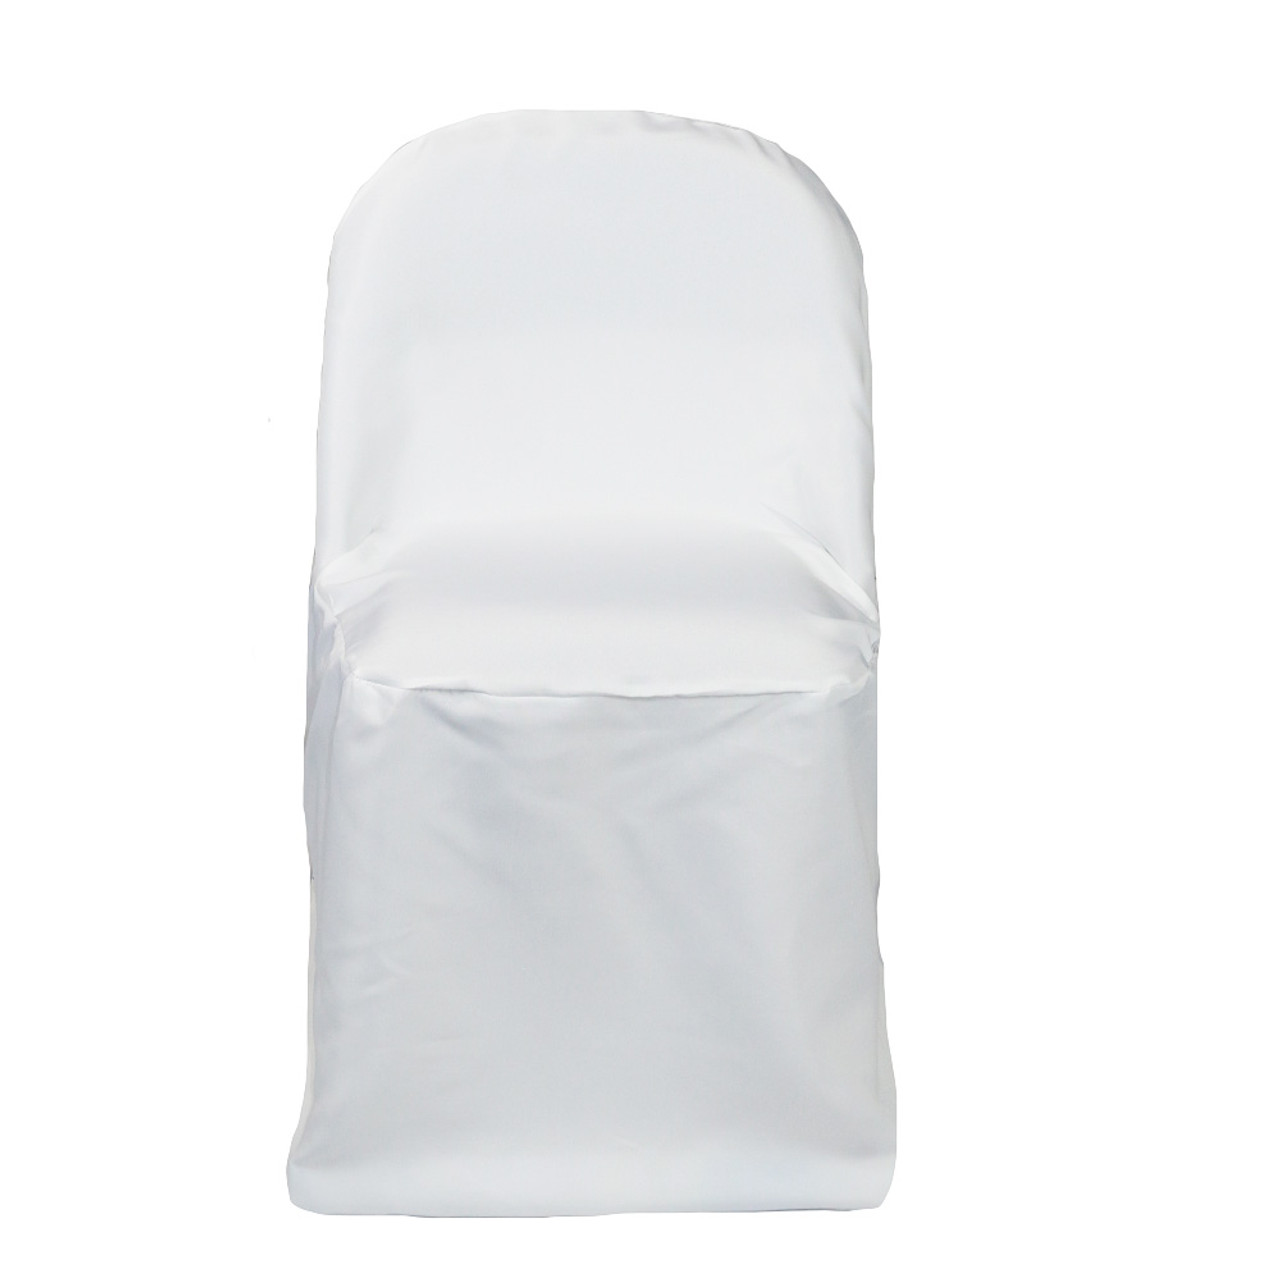 Polyester Folding Chair Cover White 3  61034.1580407801 ?c=2